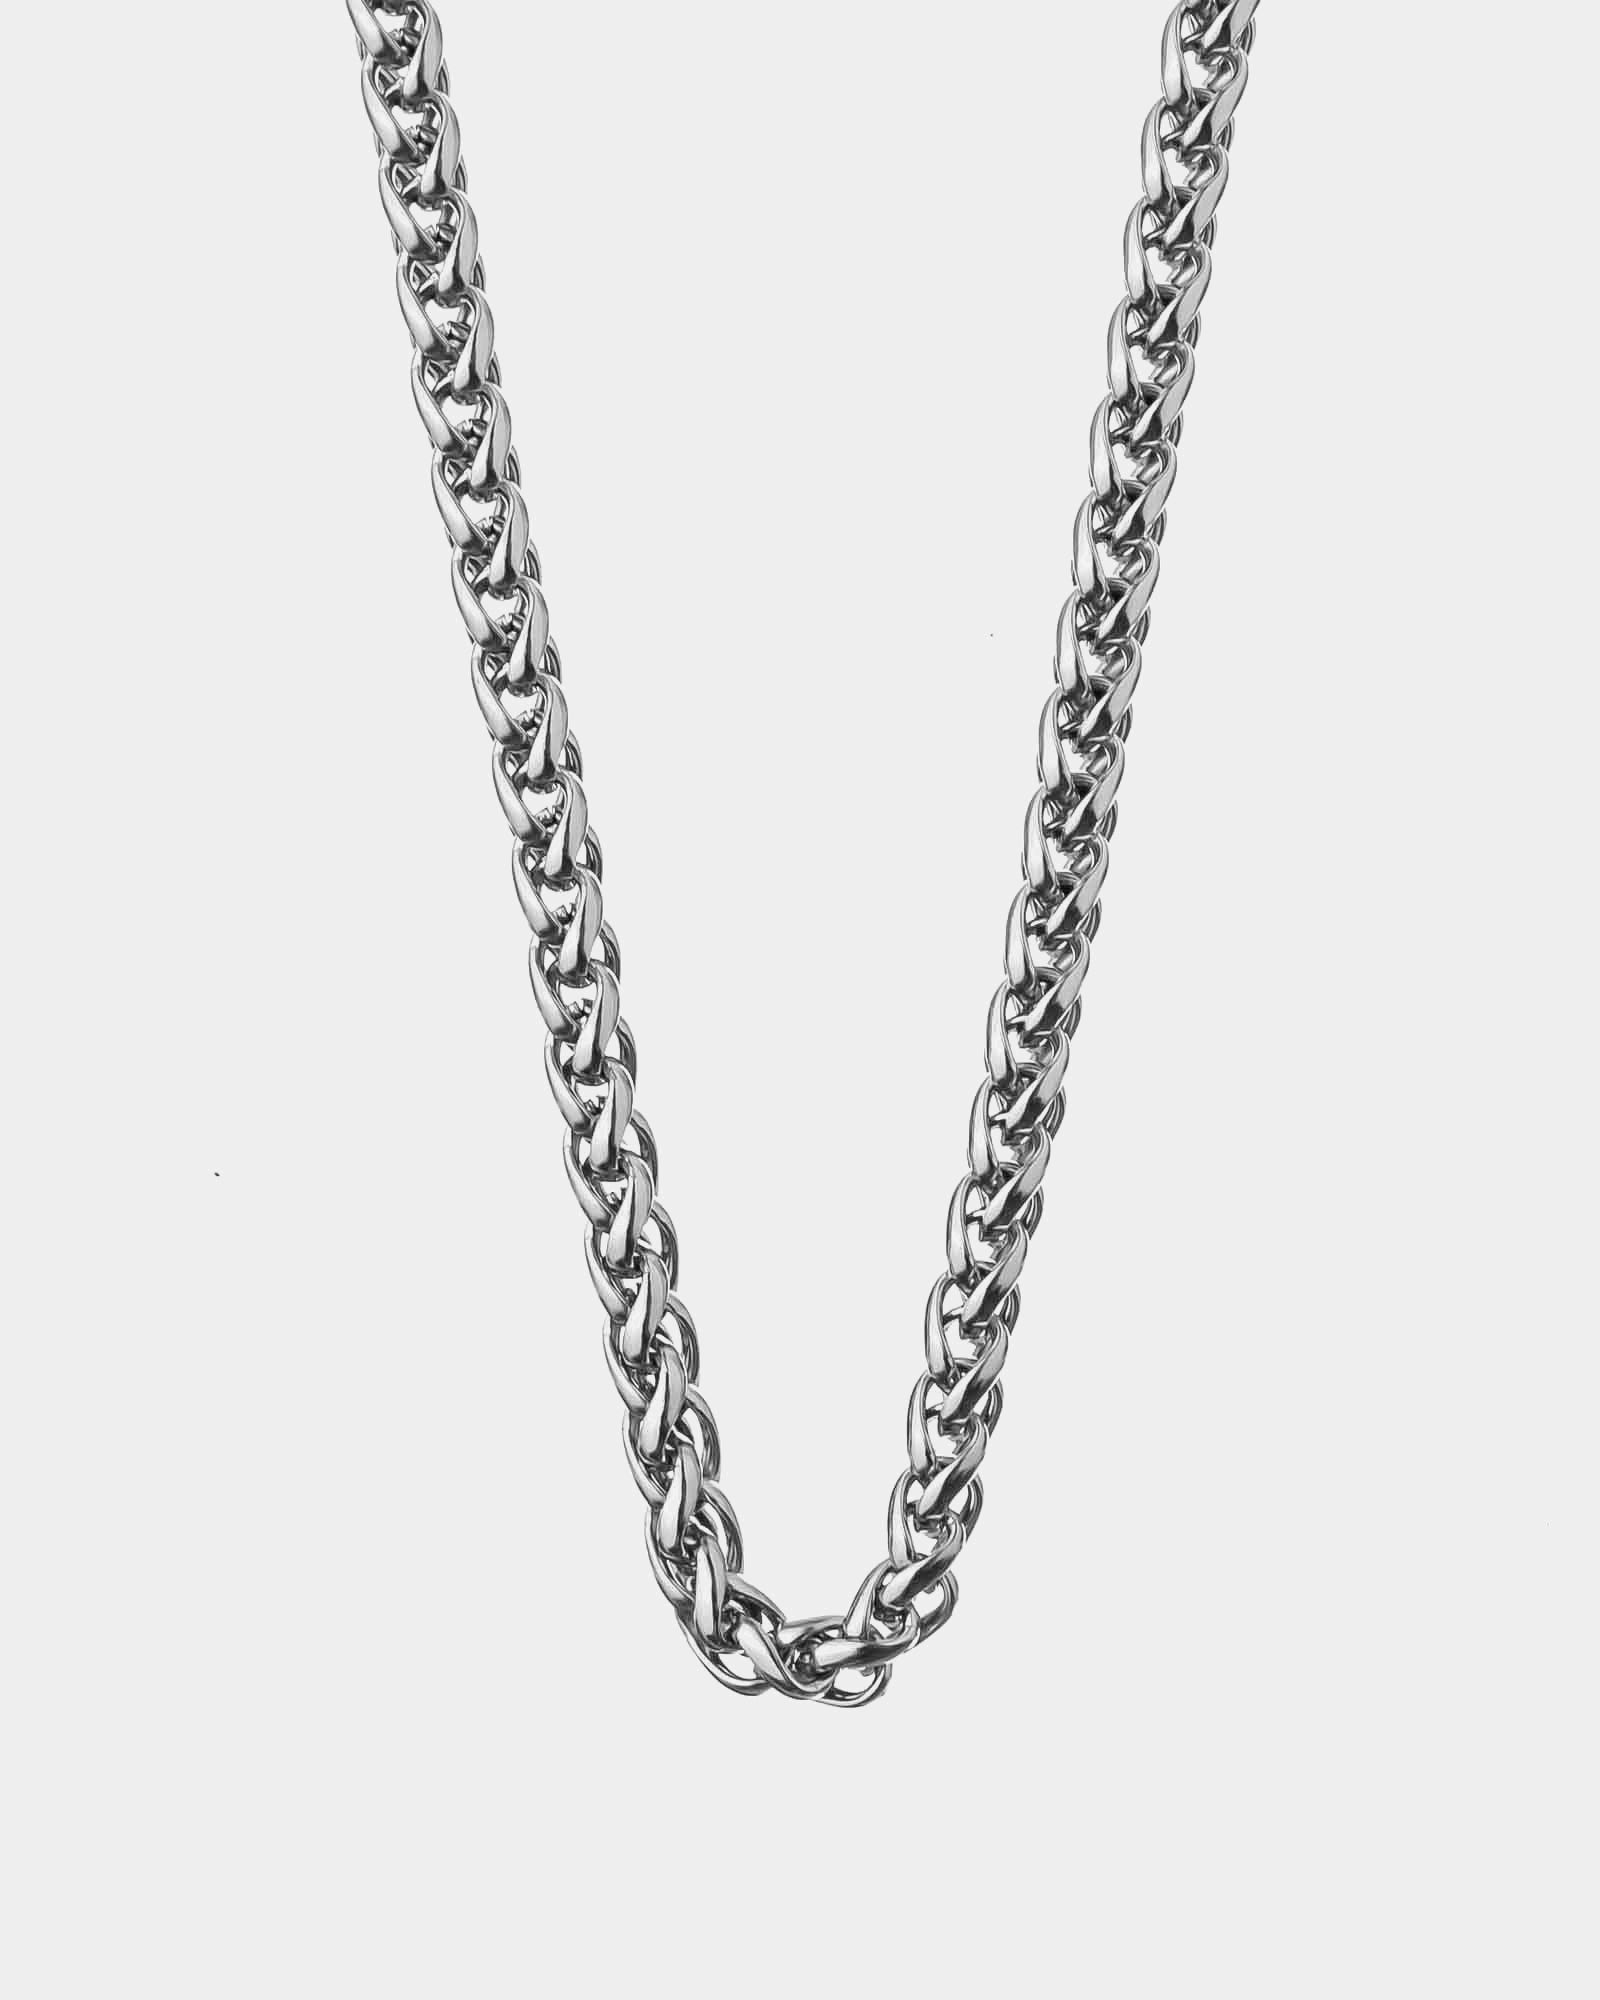 Stainless Steel Necklace 'Berlin' - Unisex Necklace - Online Jewelry - Dicci